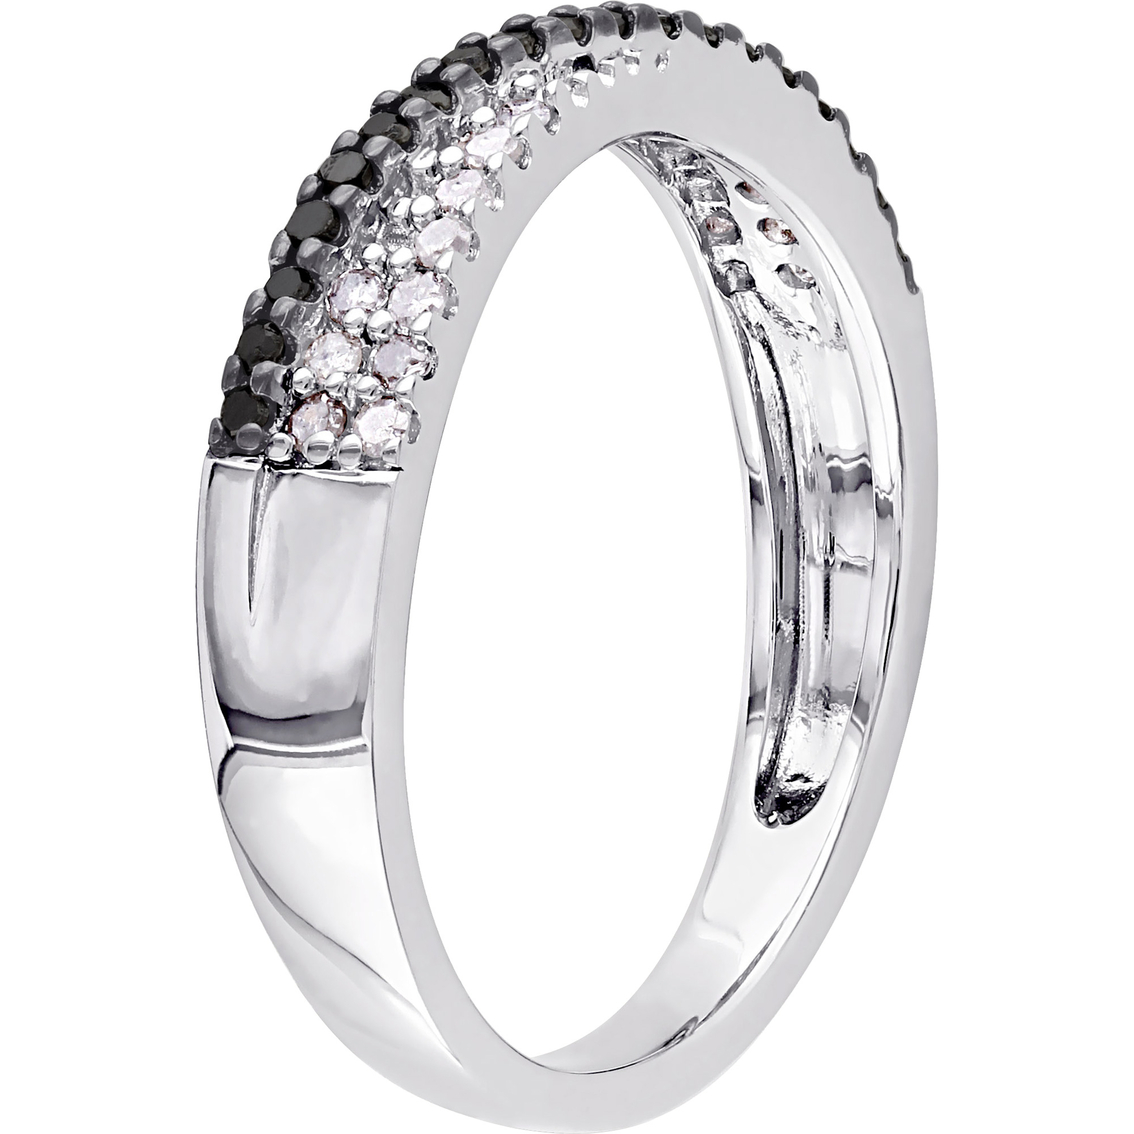 Sofia B. Sterling Silver 1/4 CTW Black and White Diamond Crossover Anniversary Band - Image 2 of 3